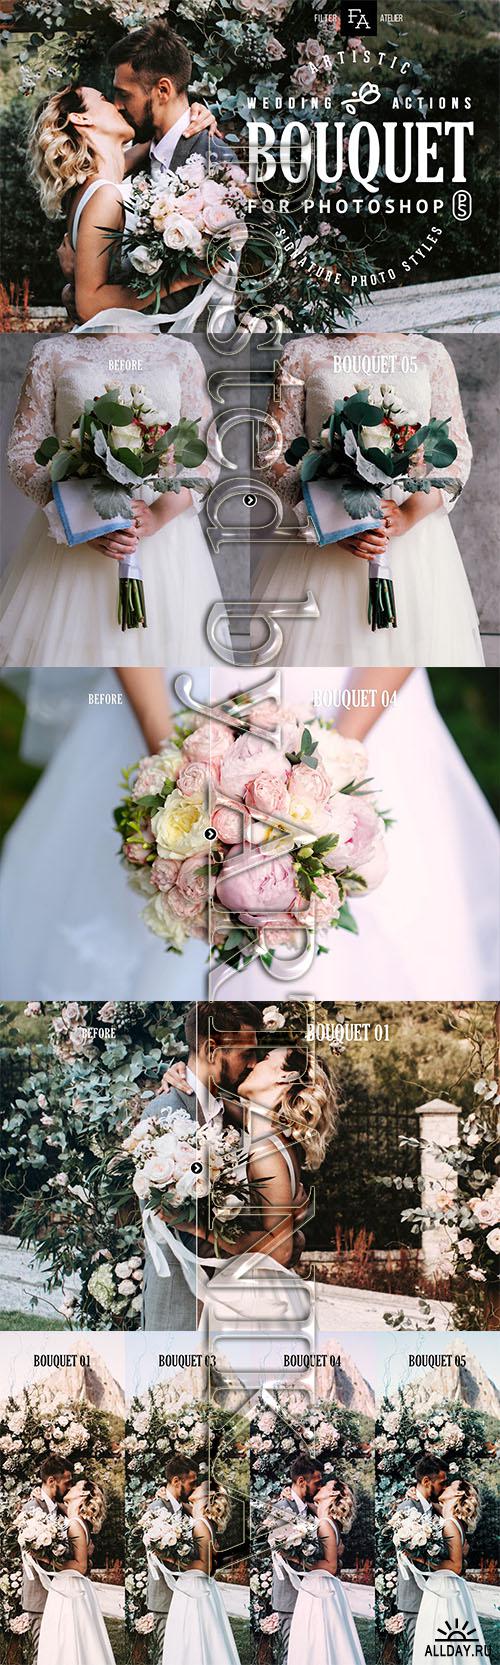 Bouquet Wedding Actions for Photoshop